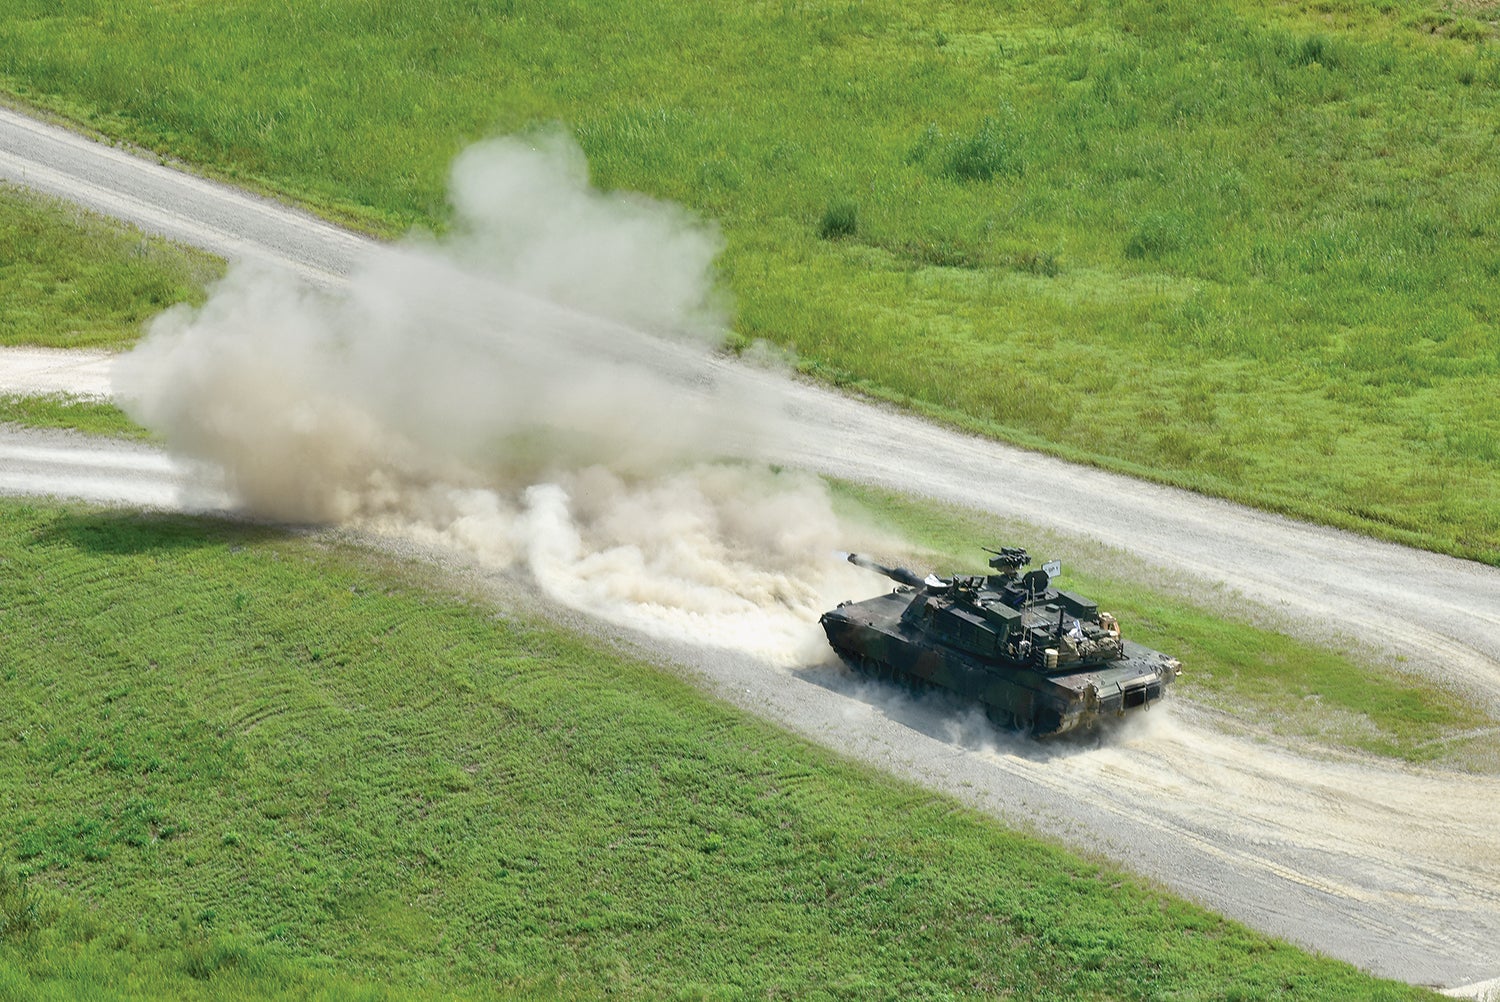 Soldiers from the 1st Armored Division conduct tank gunnery at Rodriguez Live Fire Complex, South Korea. (Credit: U.S. Army/Gen. Rajagau Tuan Lante)